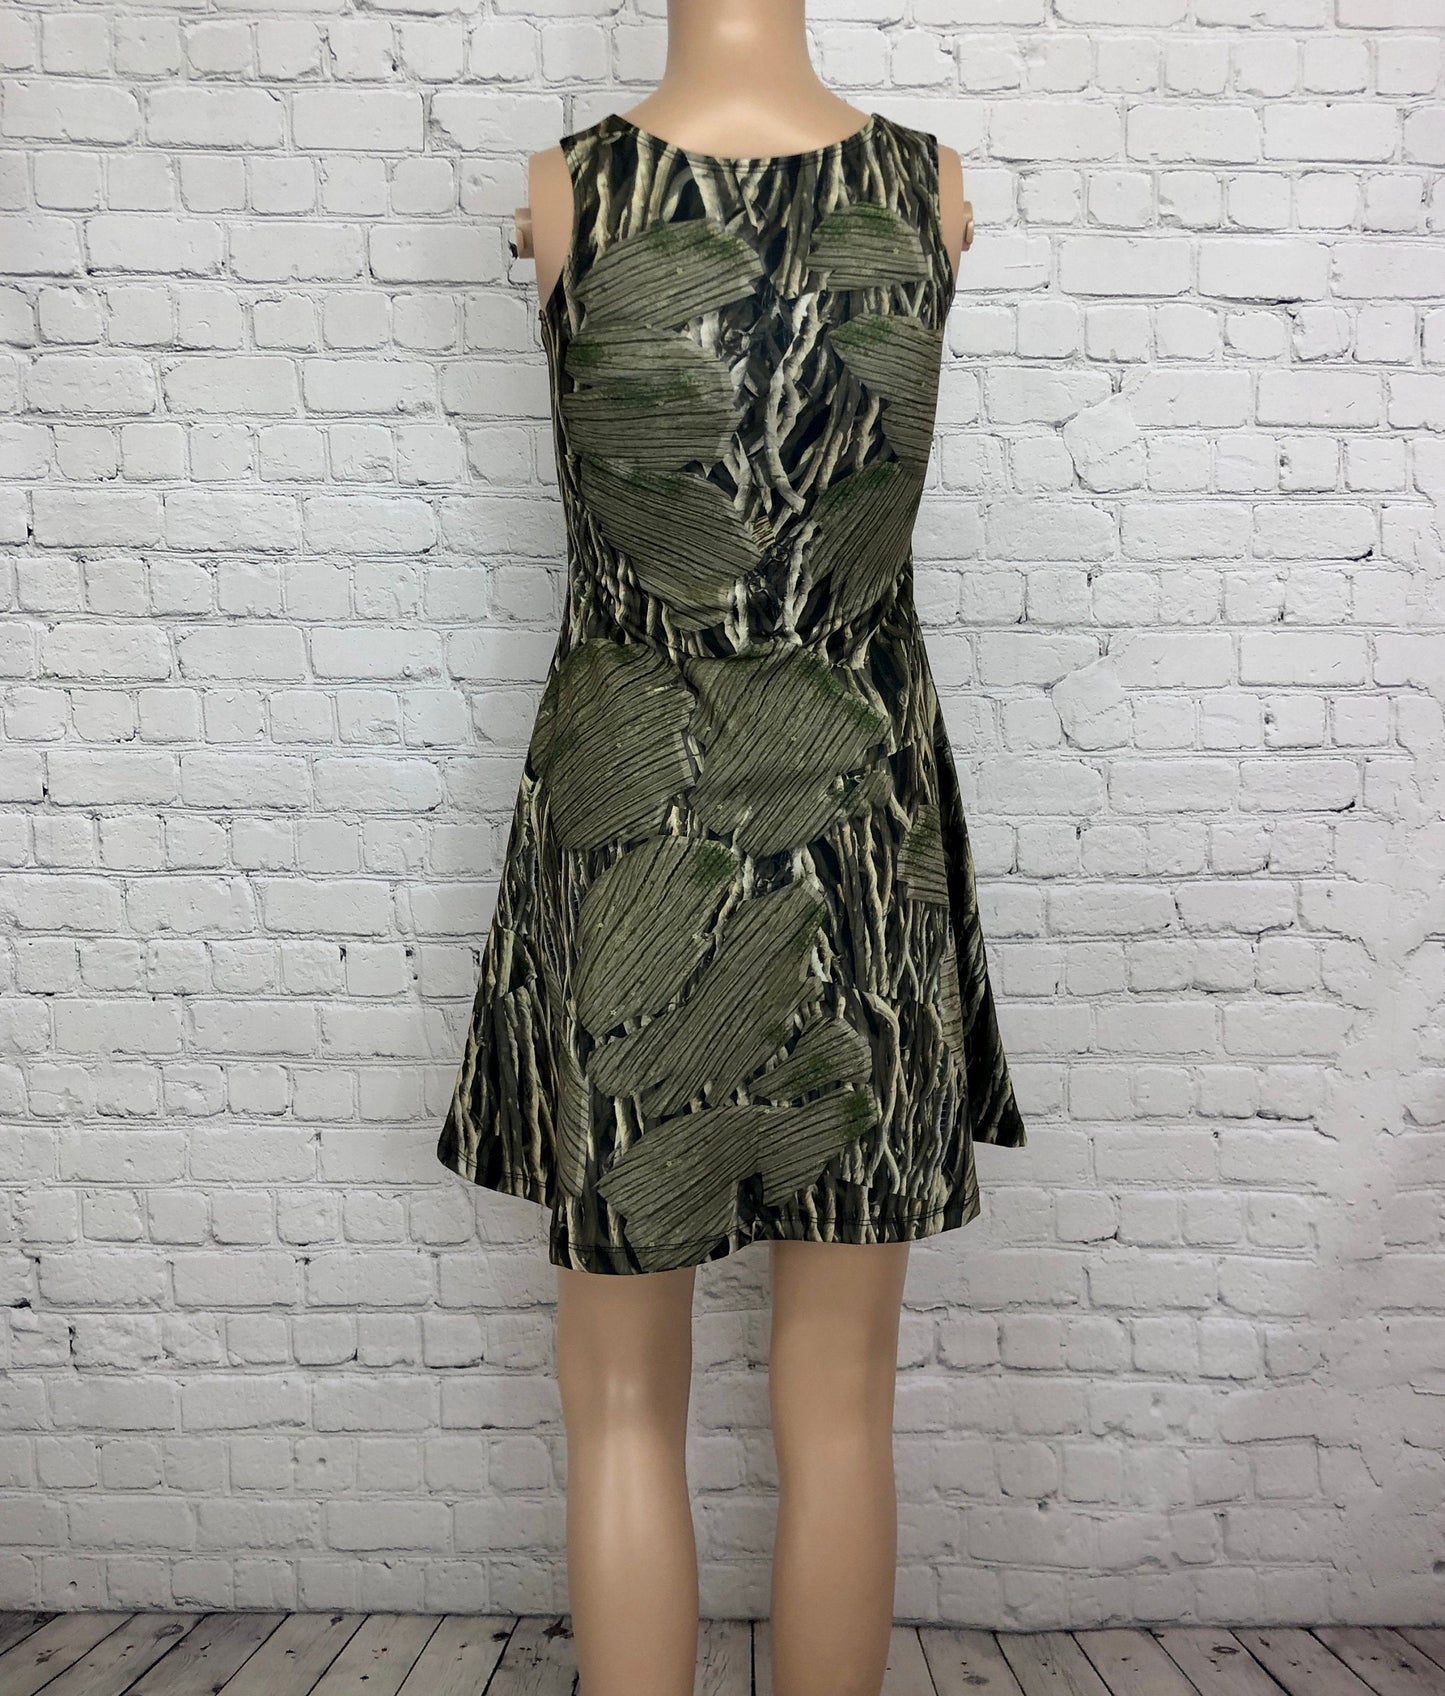 Groot Guardians of the Galaxy Inspired Sleeveless Dress